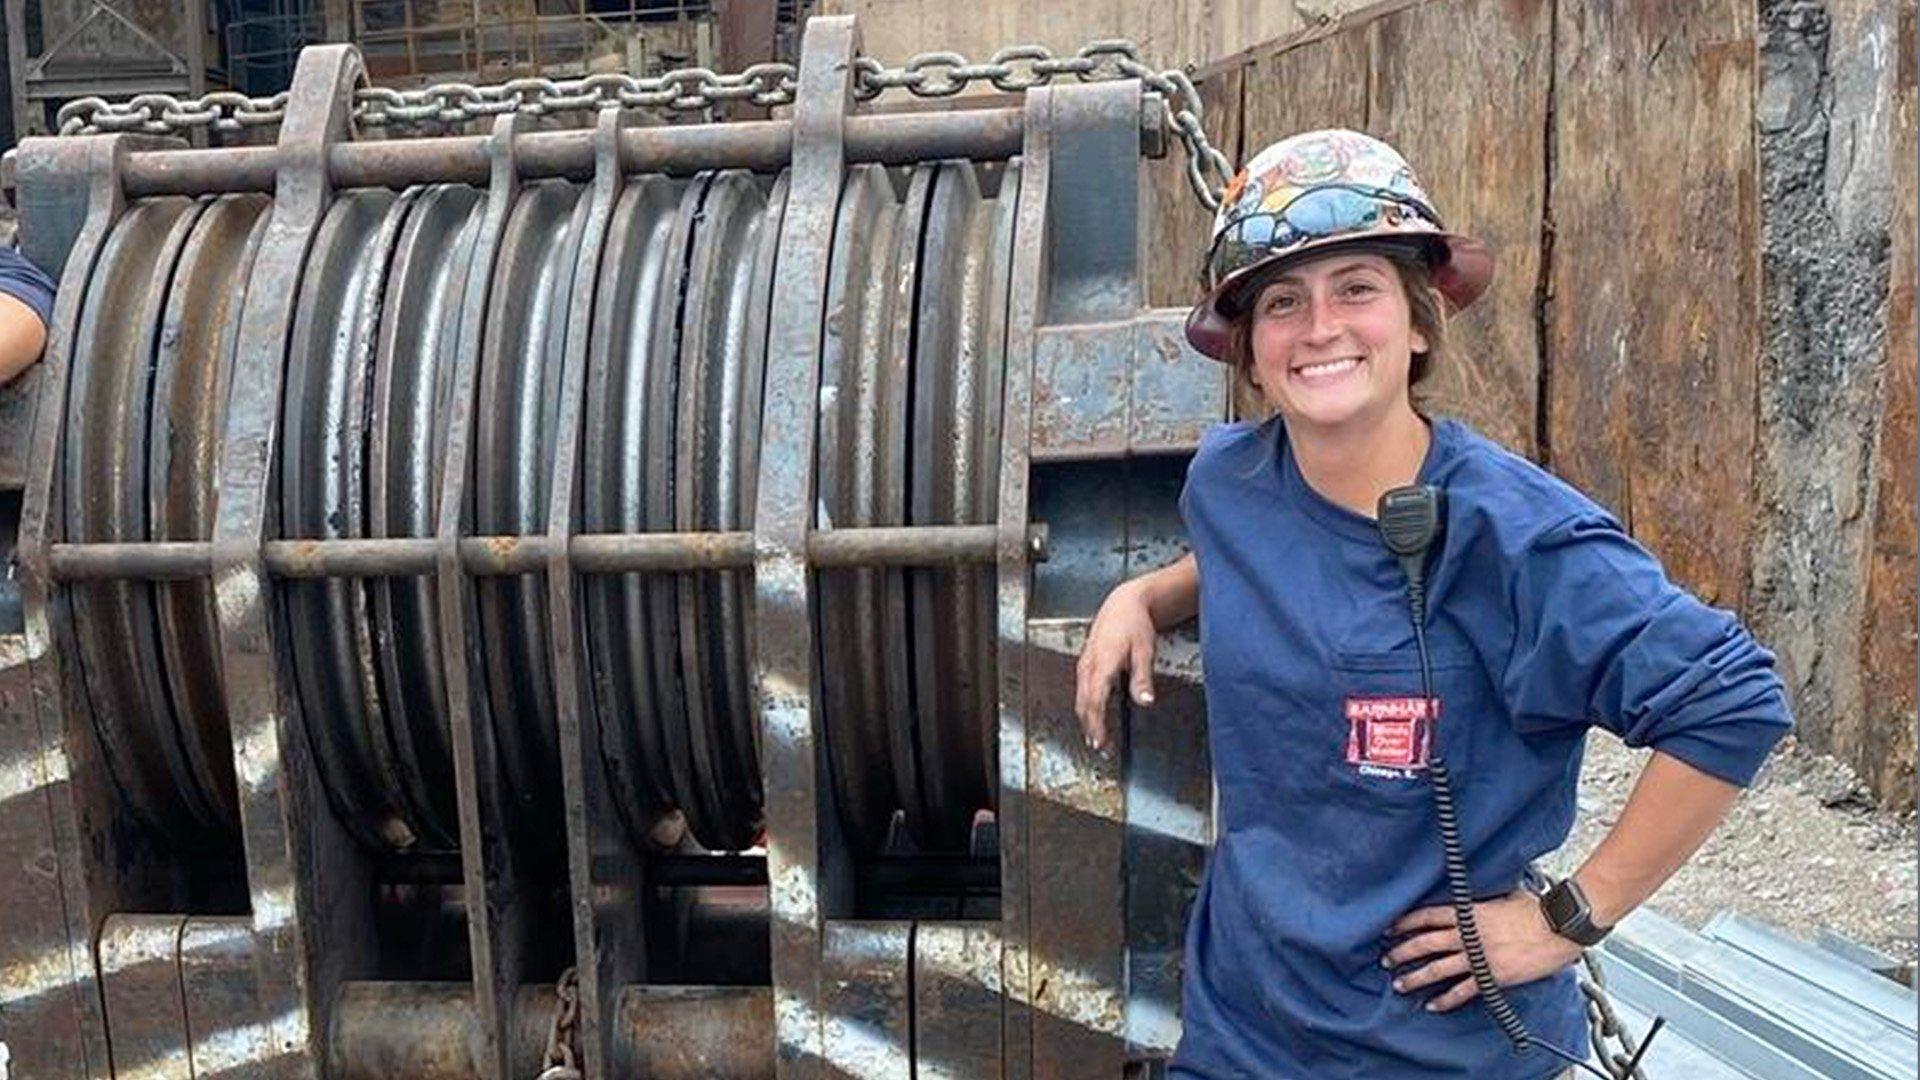 Erin M wears a hard hat and smiles next to an industrial winch with chain on a jobsite.